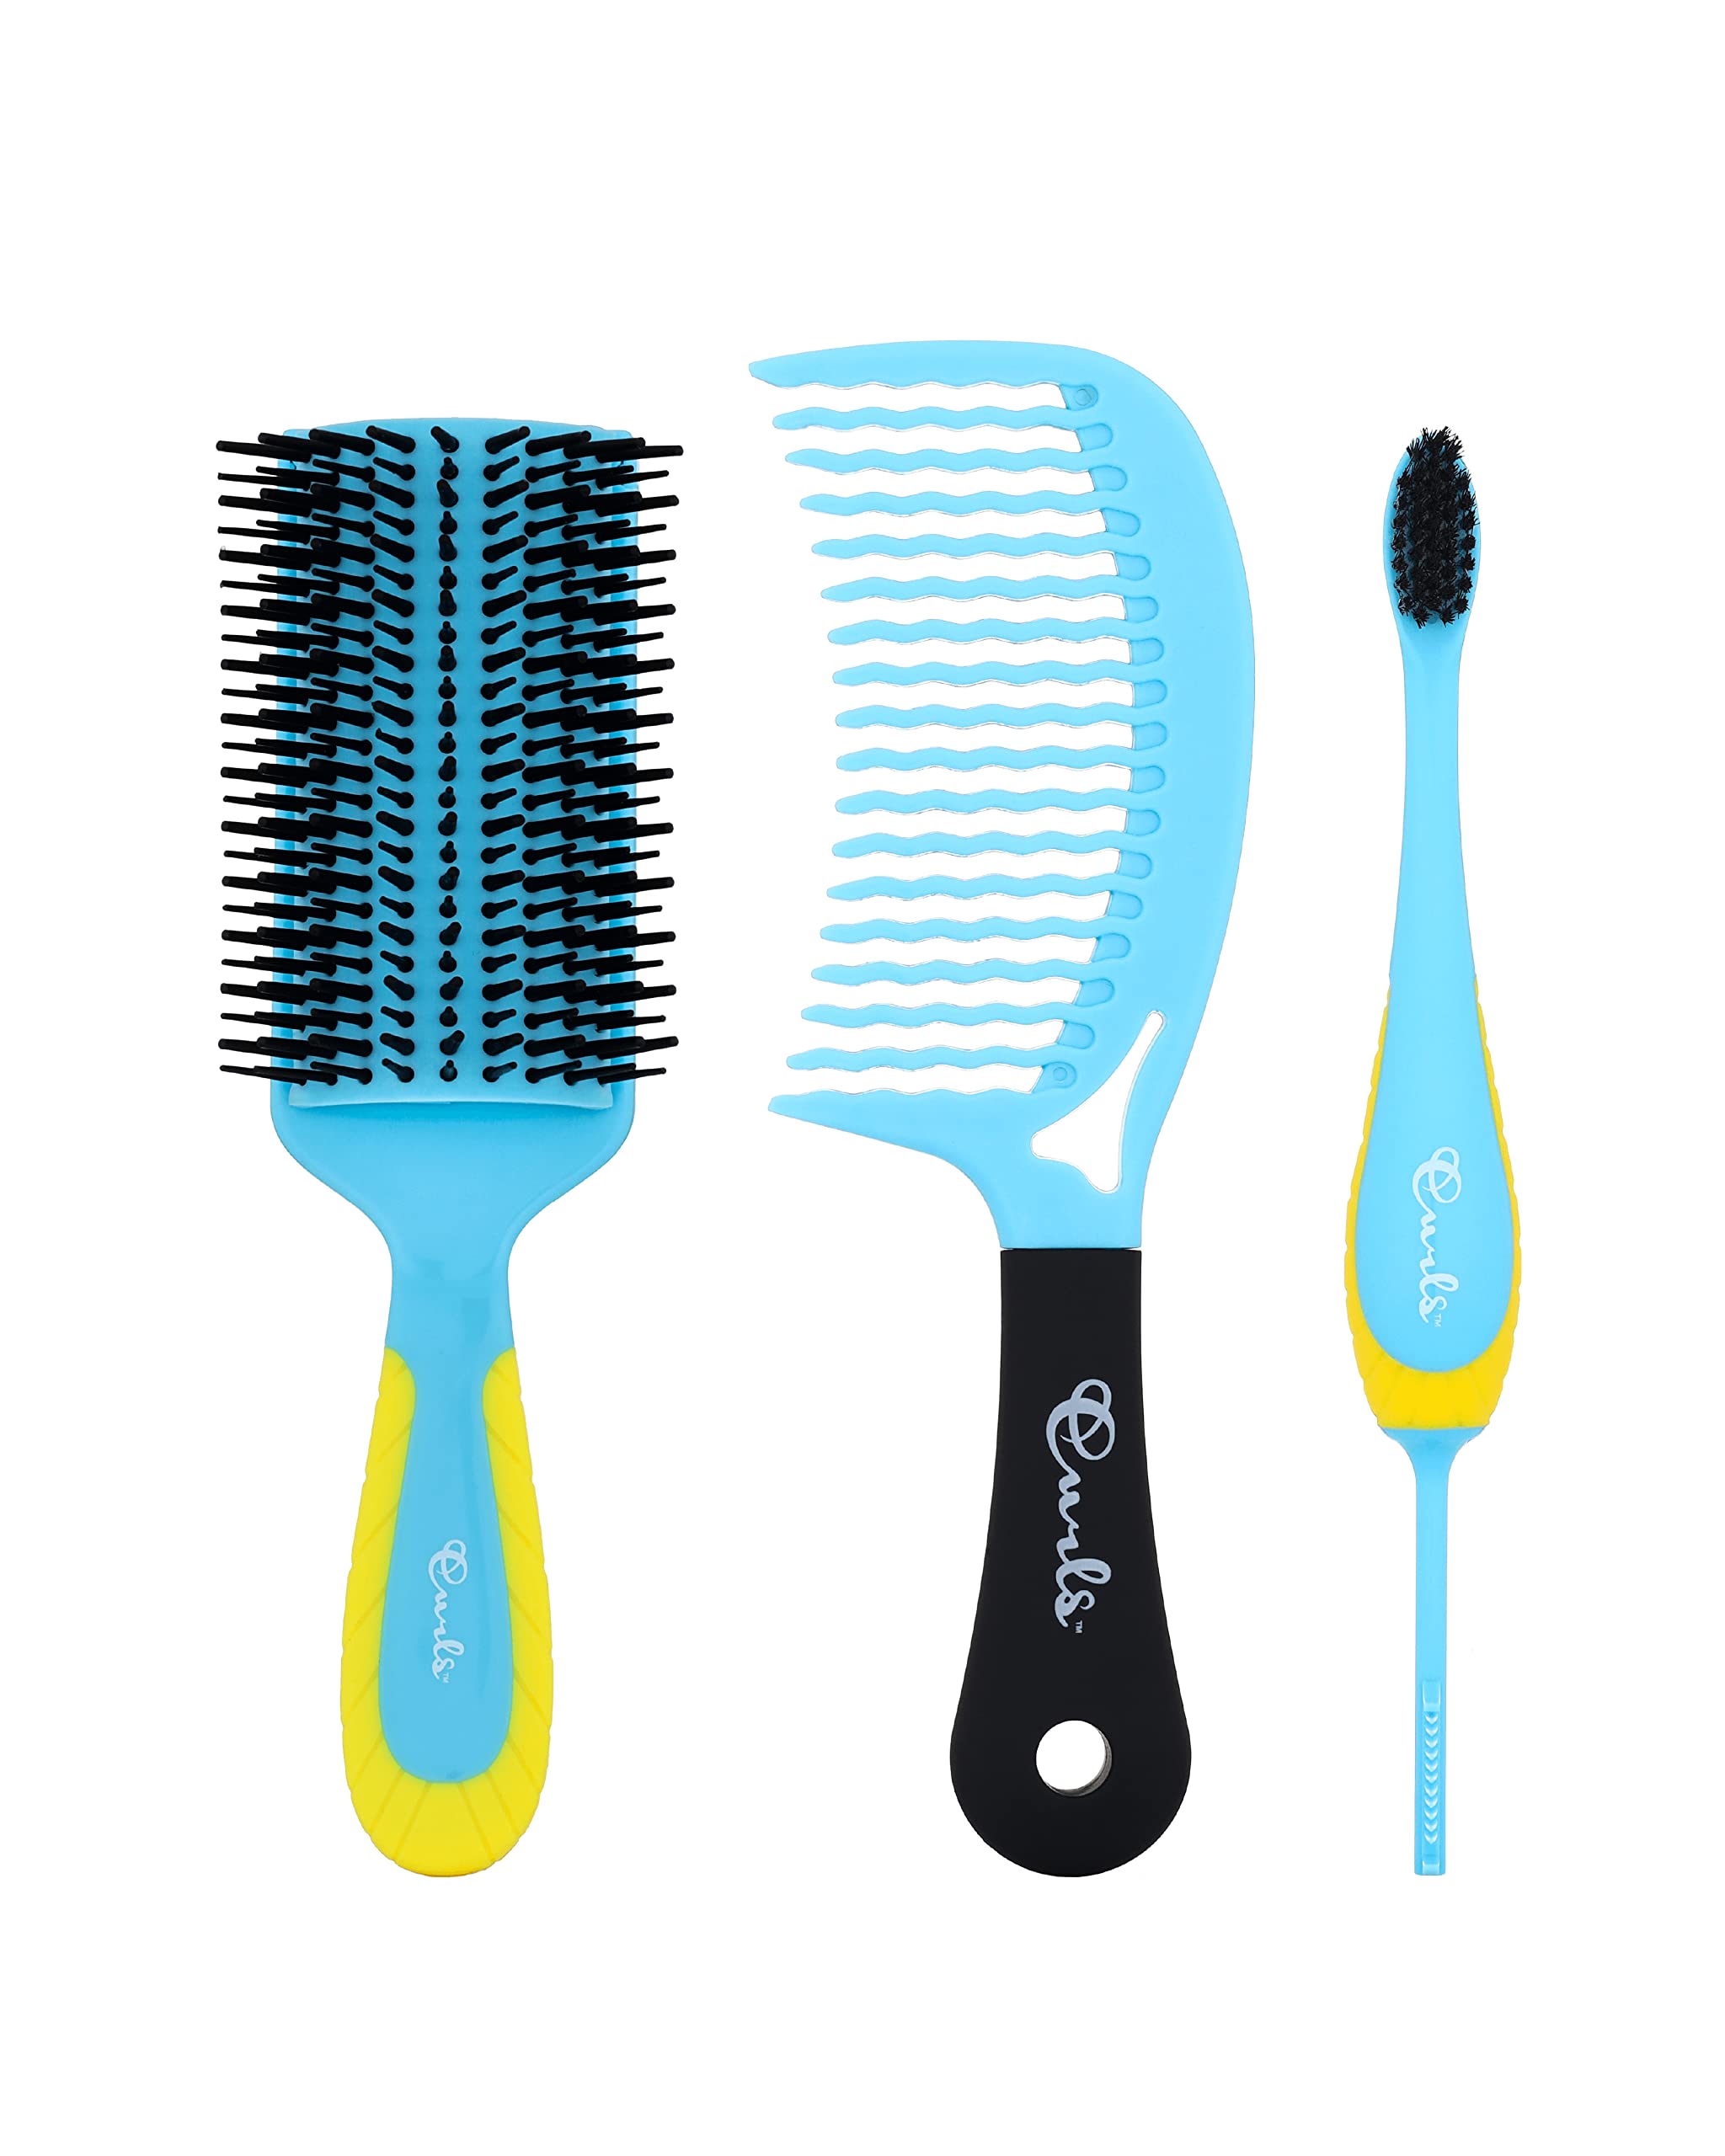 CURLS Styling Tools Ultimate Detangler Brush - Customizable Bristles for Thin or Thick Hair - For All Curl Types and Patterns,1CT